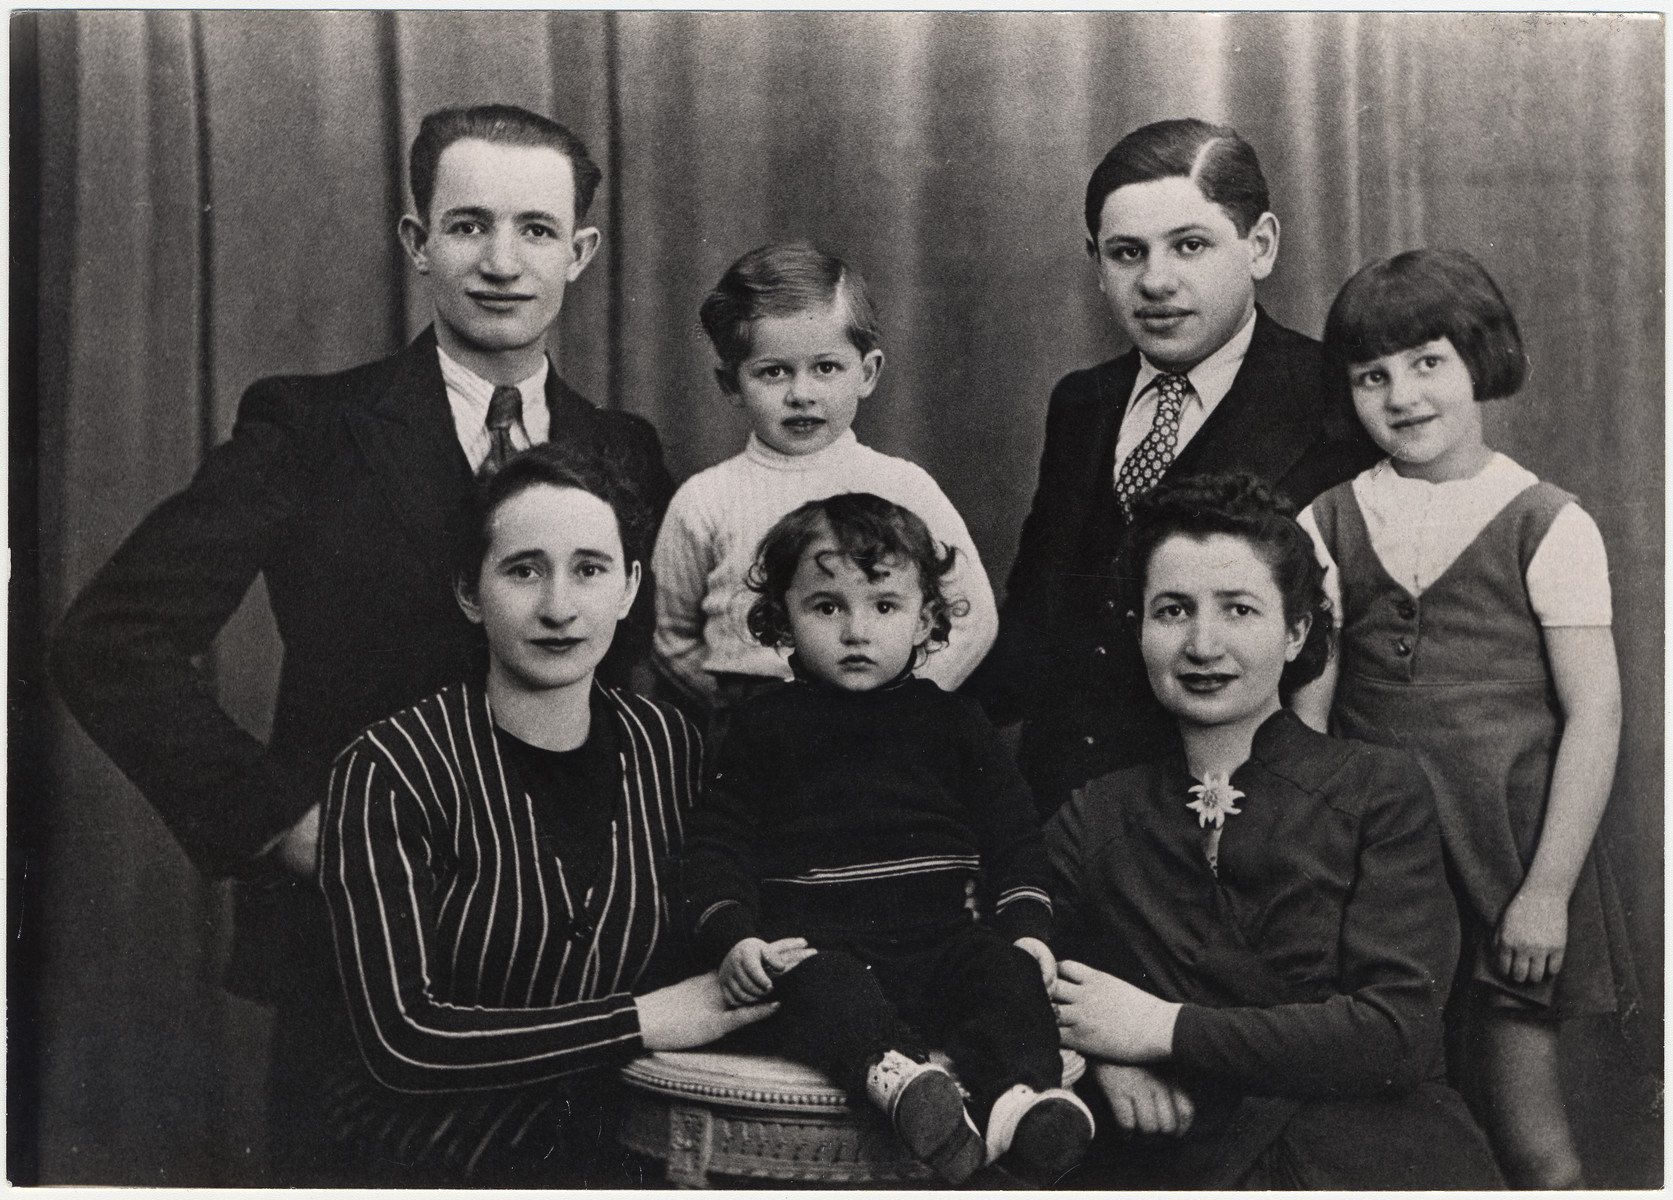 Group portrait of the Karpik family taken shortly after the German invasion of France.

Pictured are Jacques Karpik, with his parents, Szmul and Rojza (nee Taszynowicz) Karpik (left).  Also pictured are his aunt Rivkah Wasserman, uncle Benzion Wasserman and cousin Sarah Wasserman (later Wojakowski).